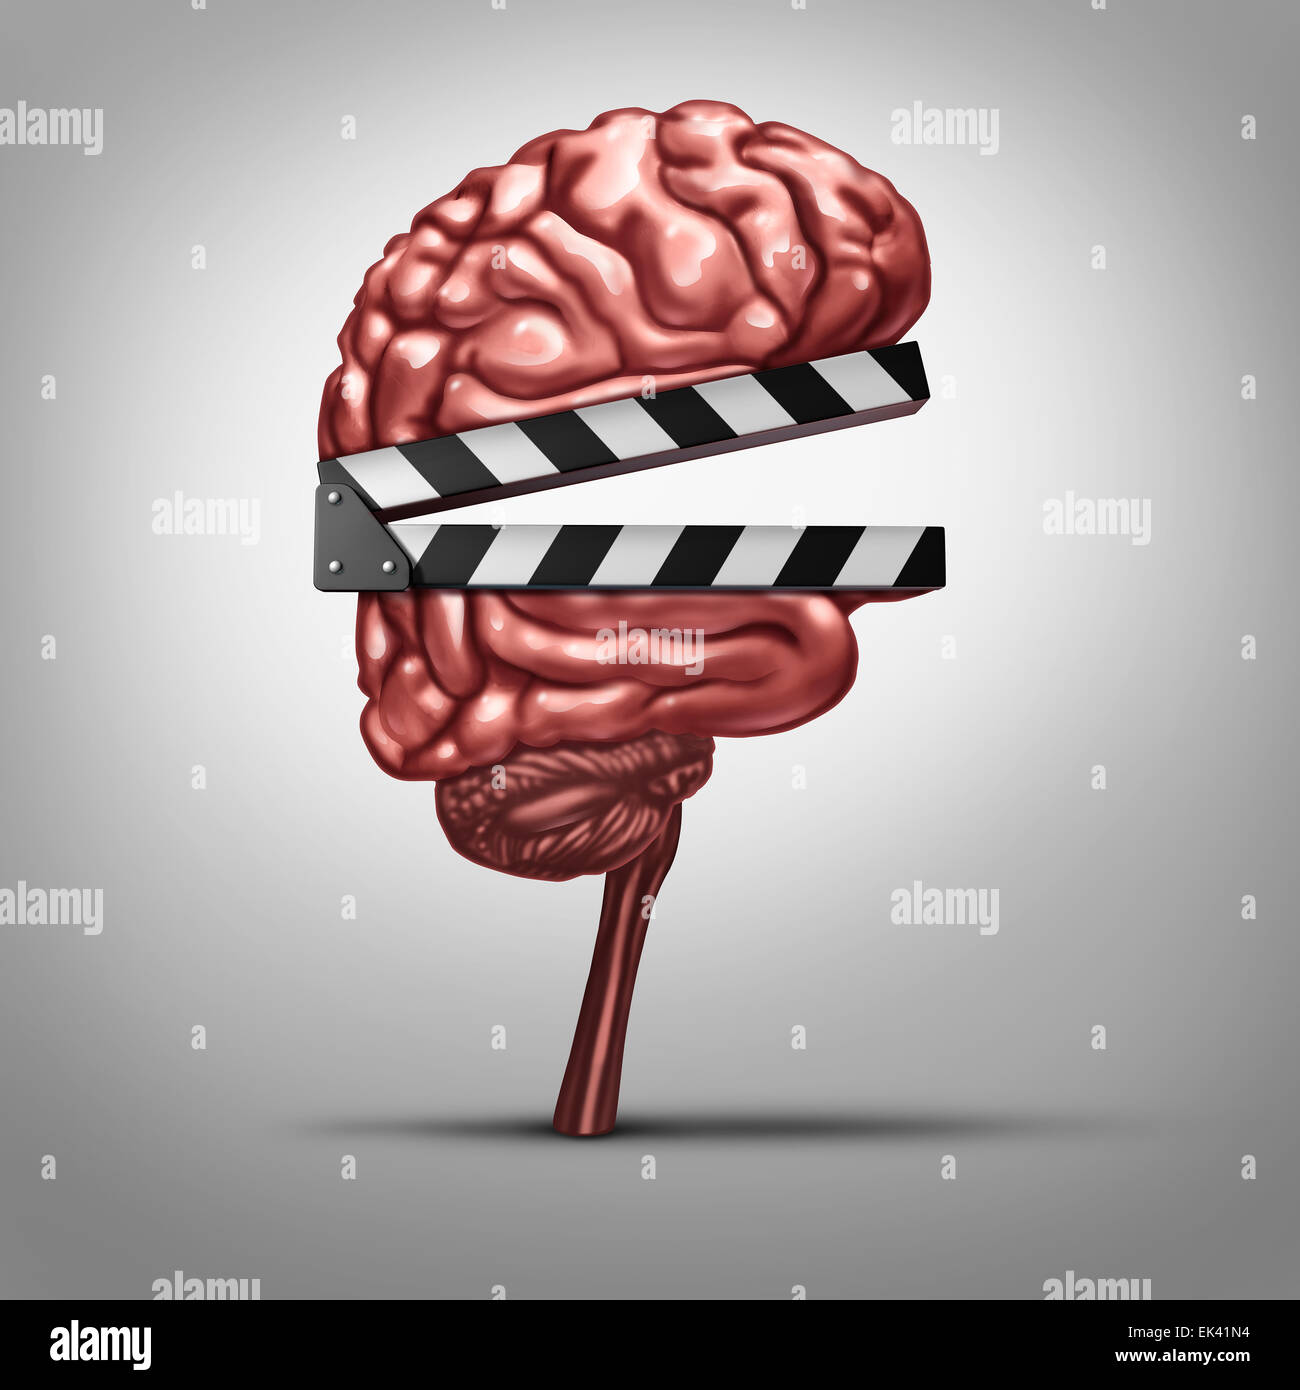 Learning video and education clips or instruction online as a clapboard shaped as a human brain as a tool for educating Stock Photo